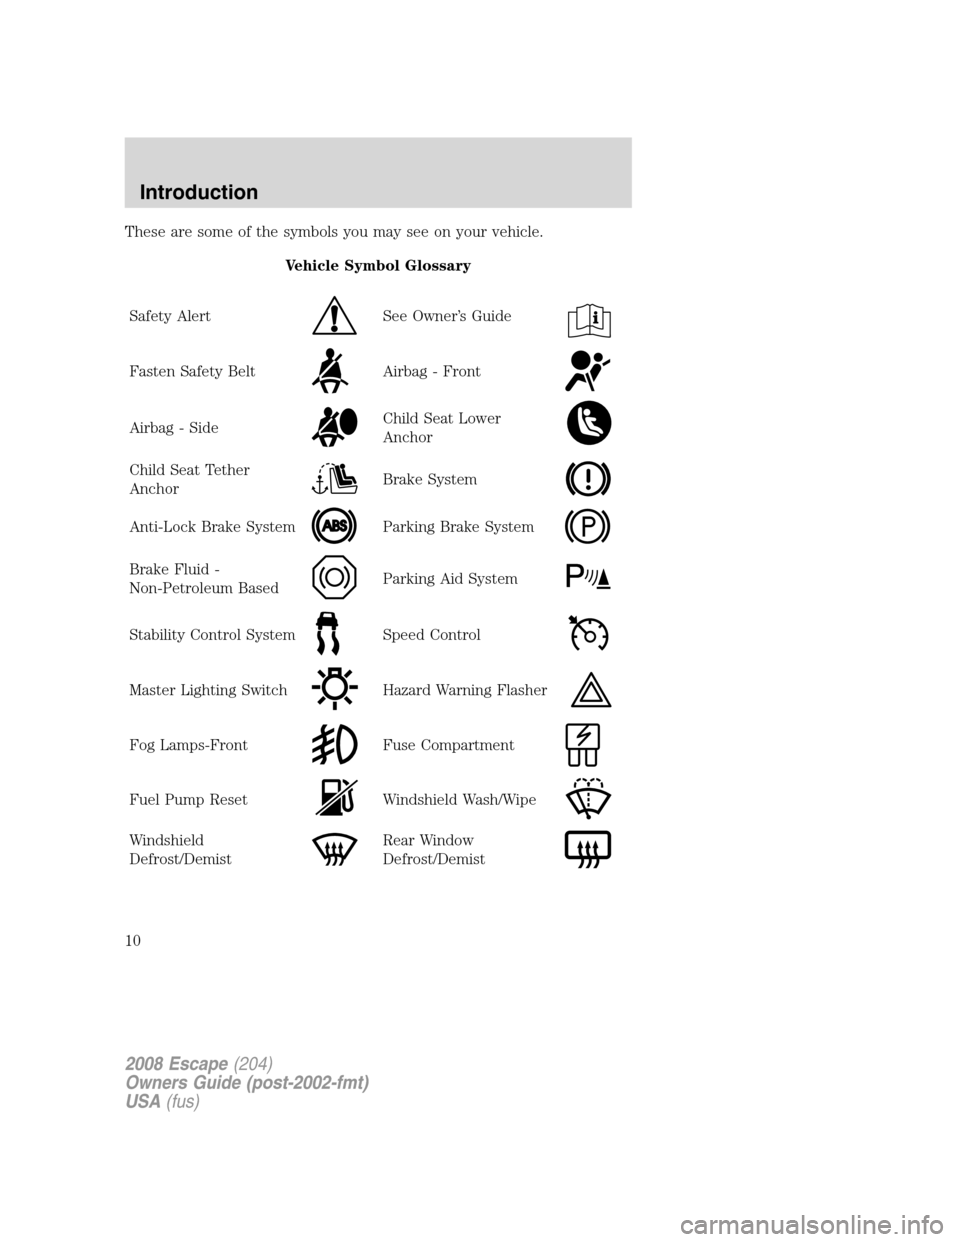 FORD ESCAPE 2008 2.G Owners Manual These are some of the symbols you may see on your vehicle.
Vehicle Symbol Glossary
Safety Alert
See Owner’s Guide
Fasten Safety BeltAirbag - Front
Airbag - SideChild Seat Lower
Anchor
Child Seat Tet